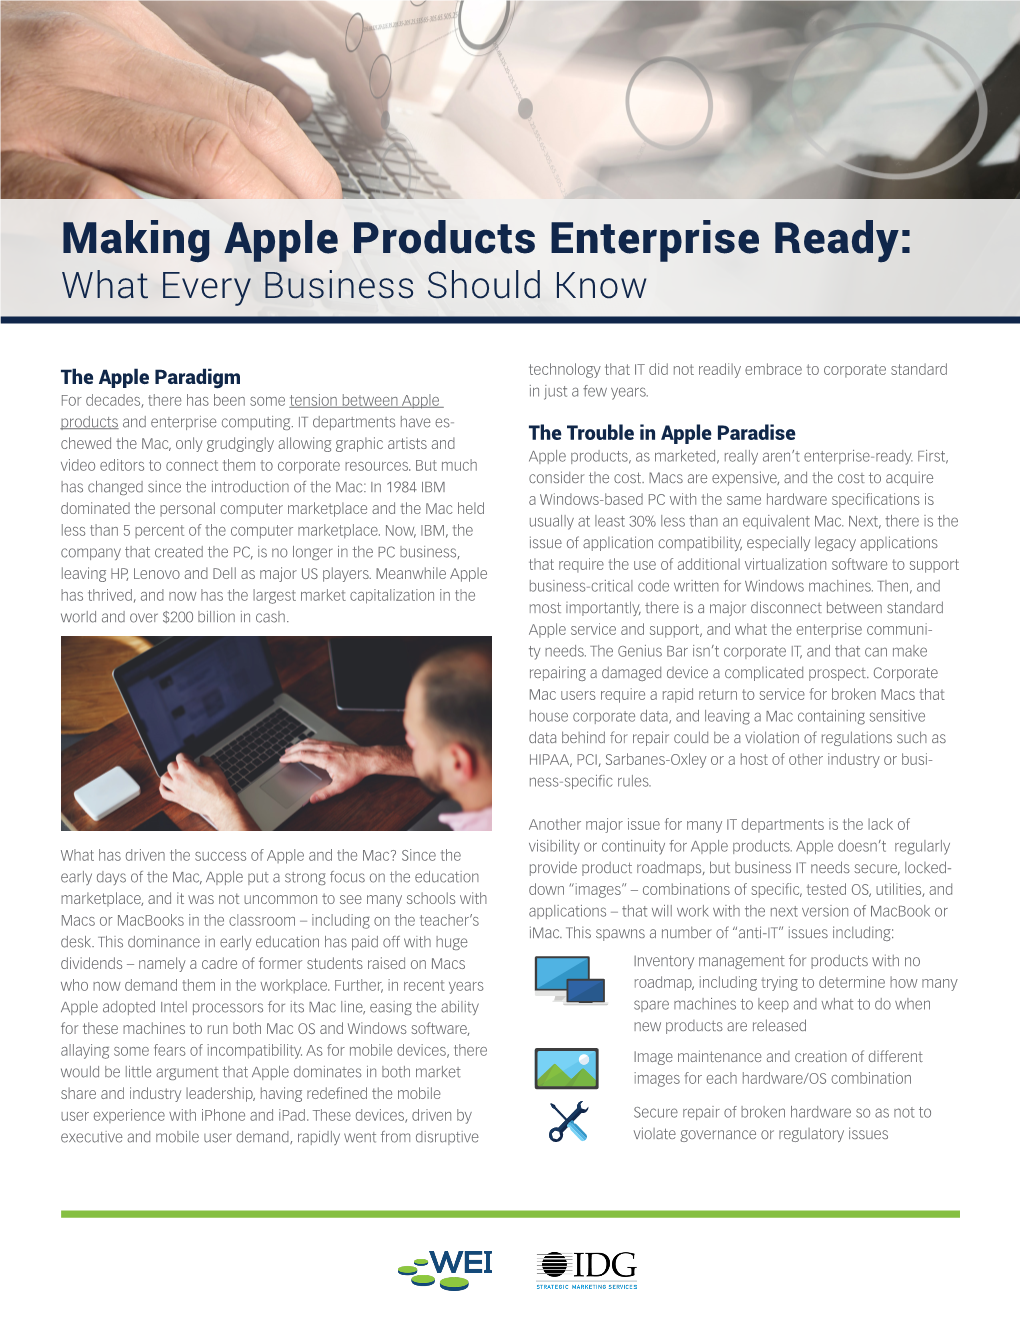 Making Apple Products Enterprise Ready: What Every Business Should Know